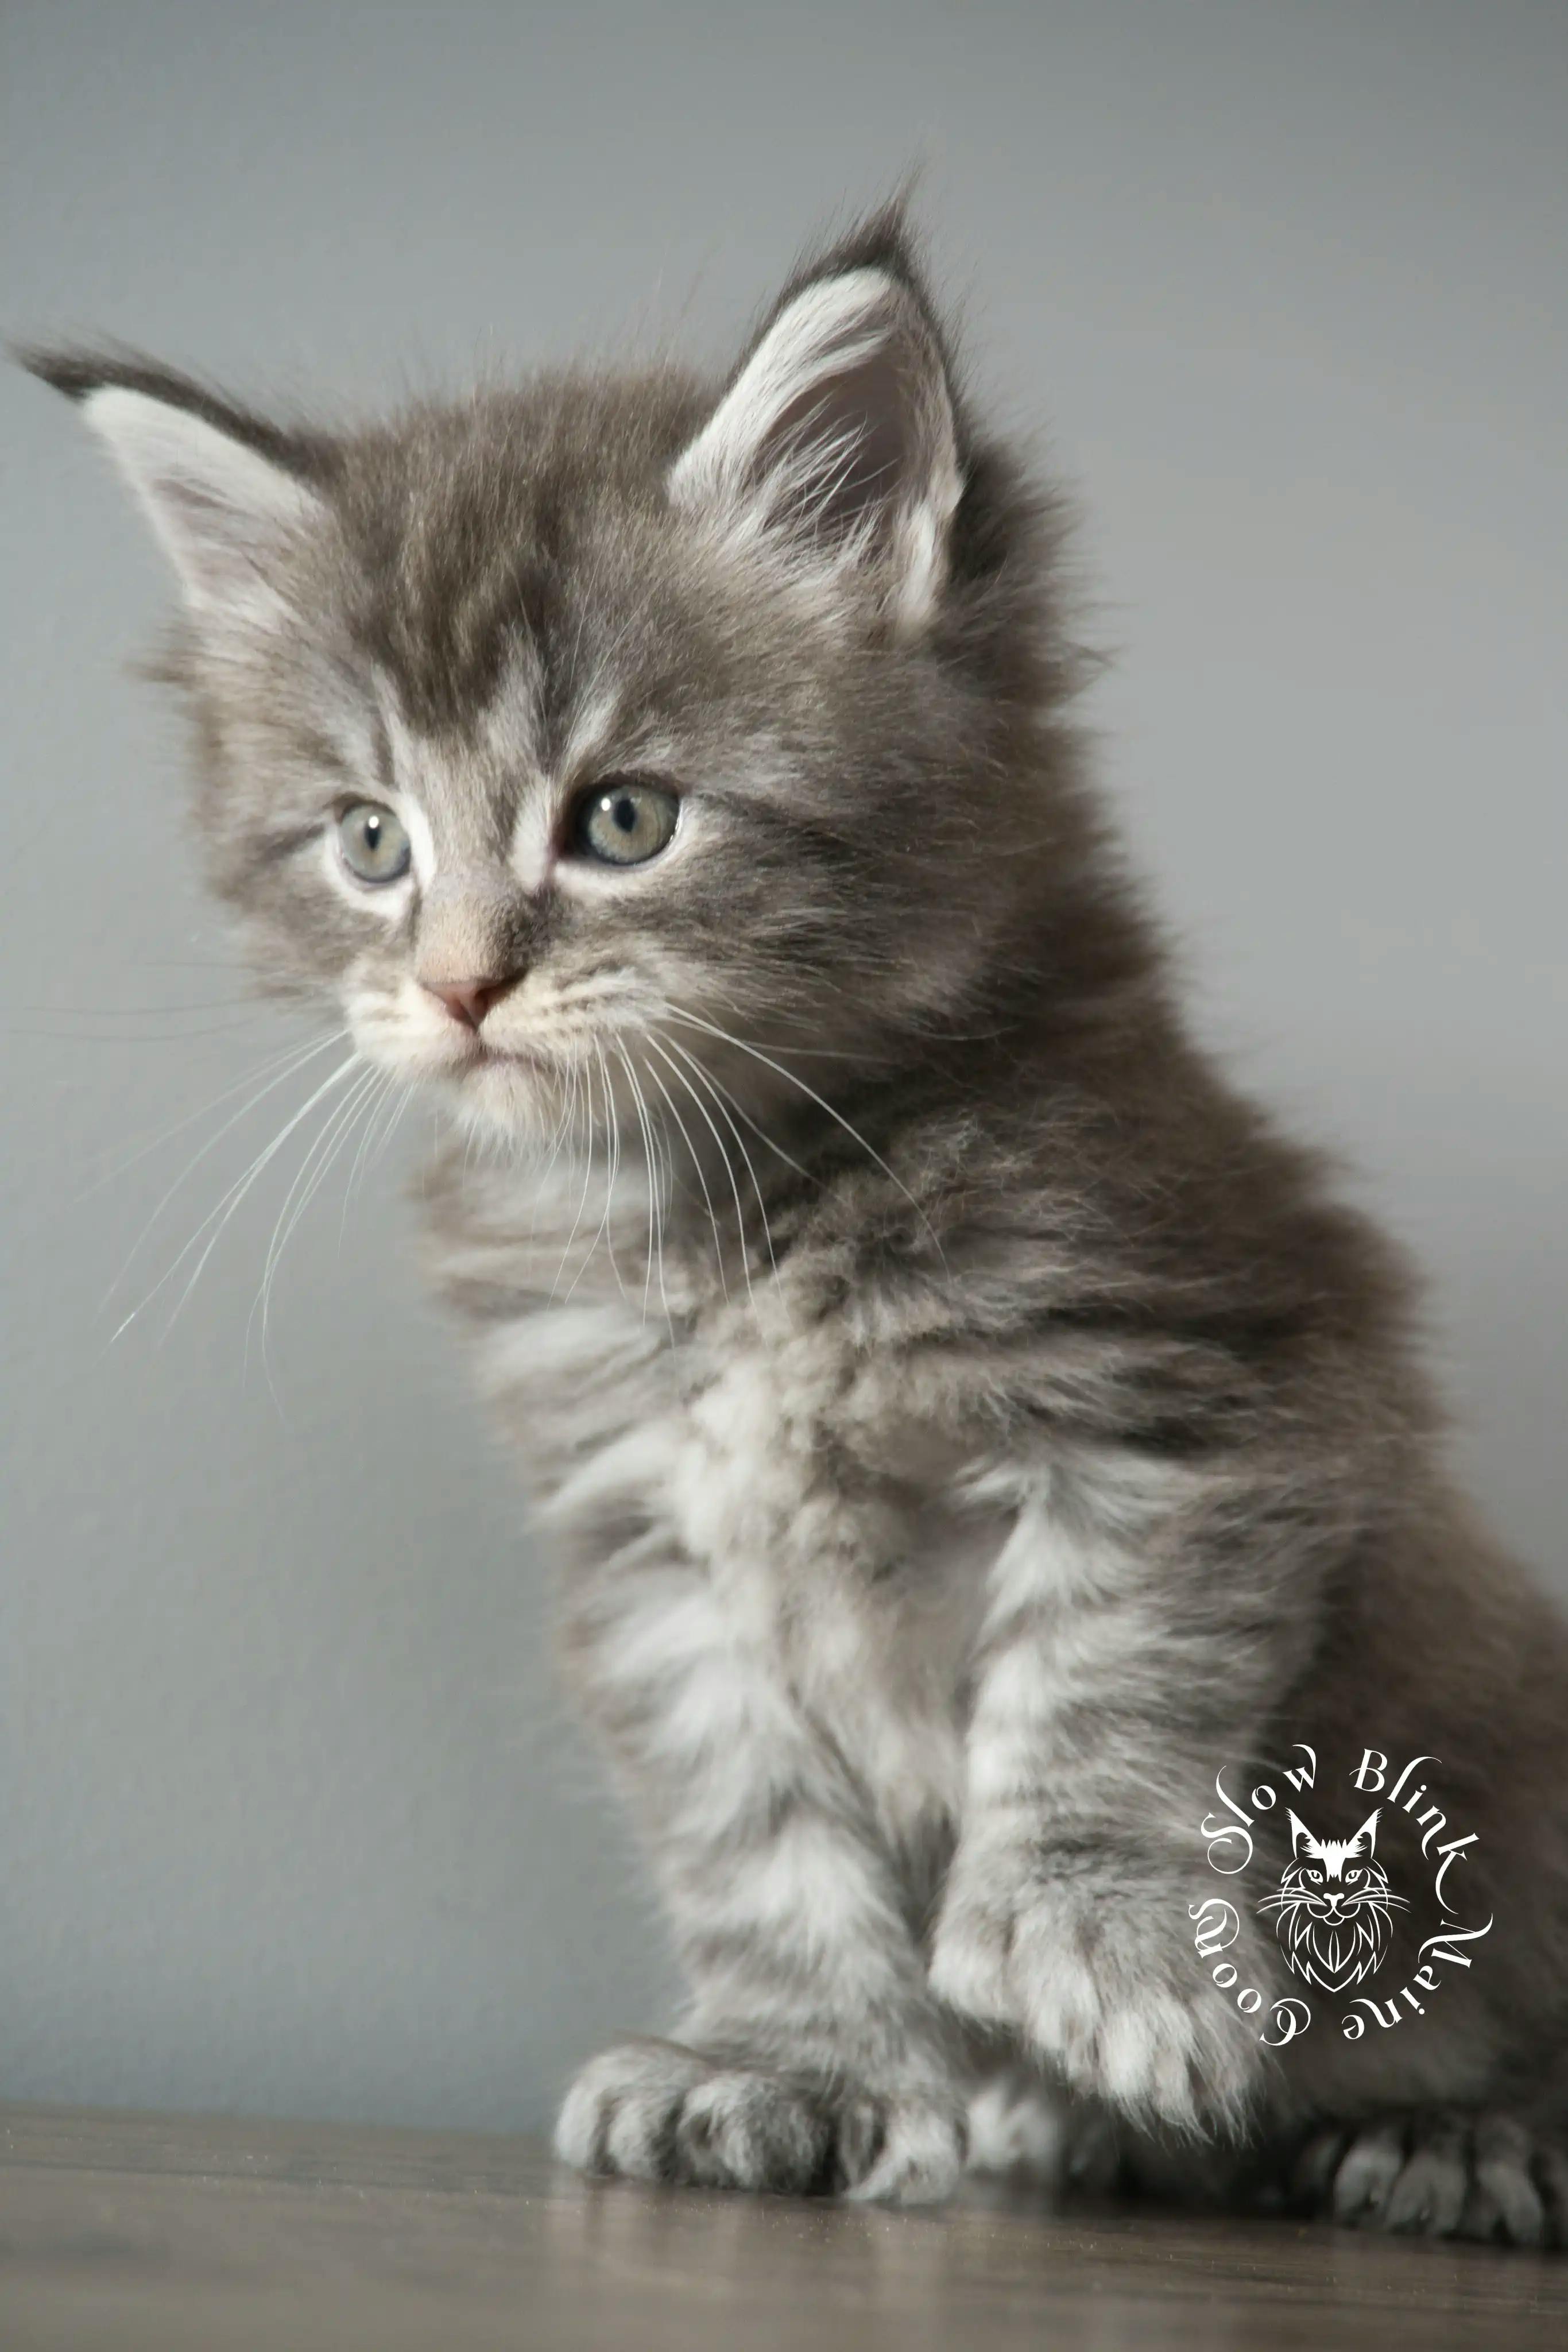 Blue Silver Tabby Maine Coon Kittens > blue silver tabby maine coon kitten | slowblinkmainecoons | 01